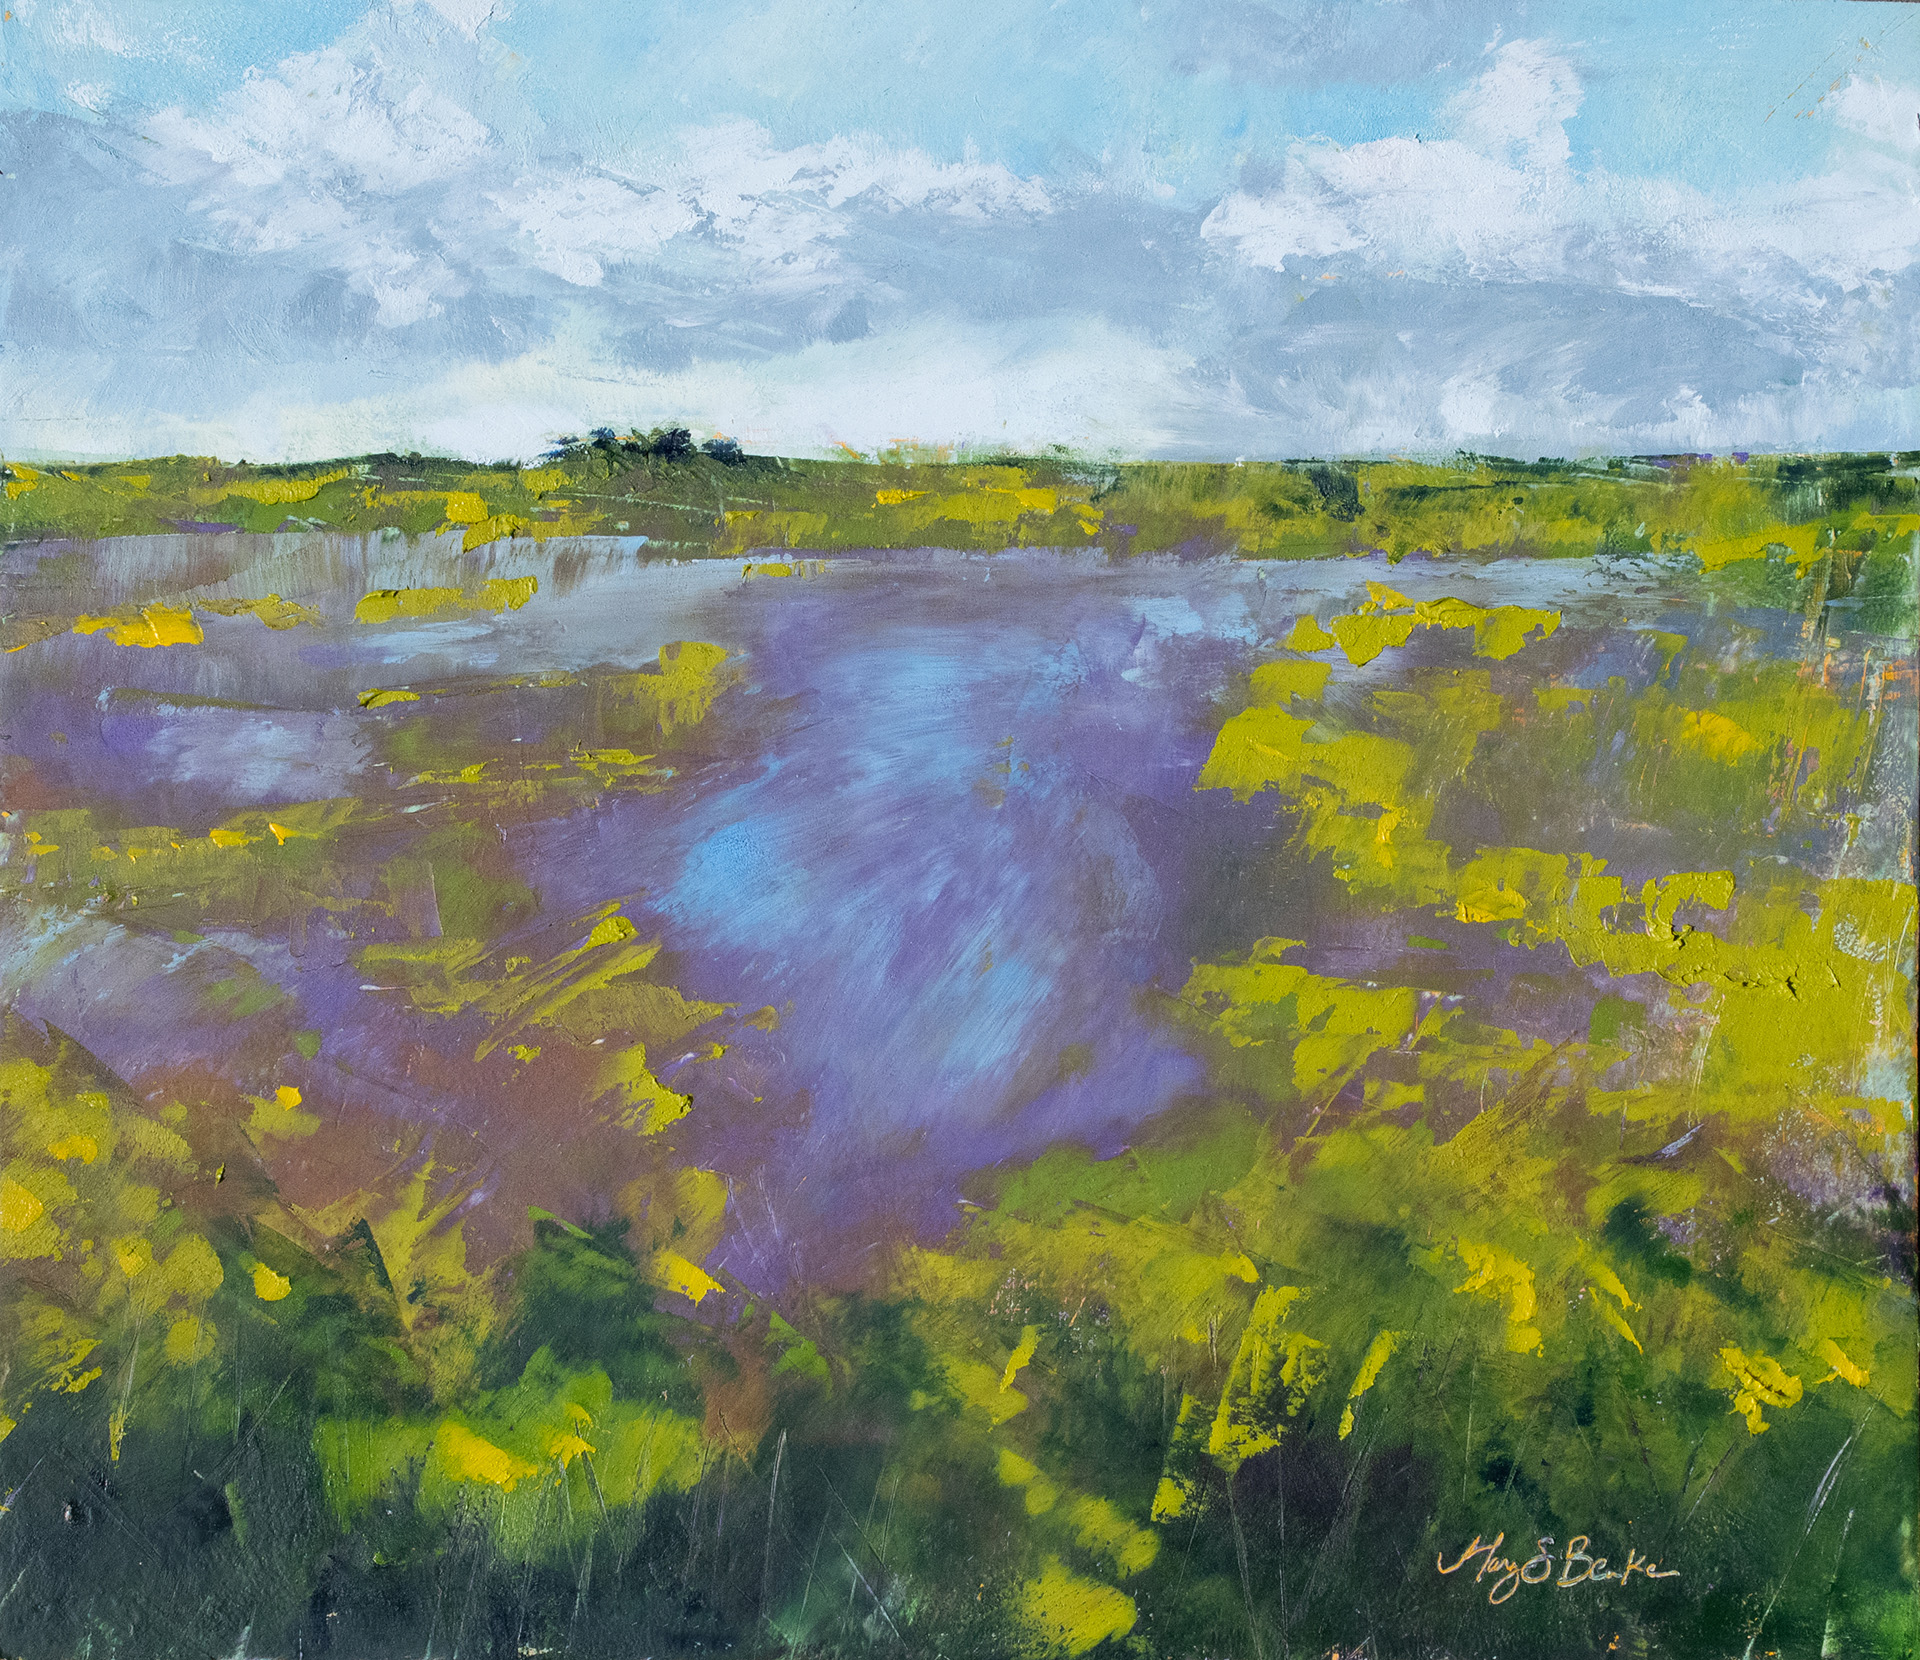 Greens, yellows, and lavenders combine in this vibrant oil painting of a midwest marshland by Mary Benke